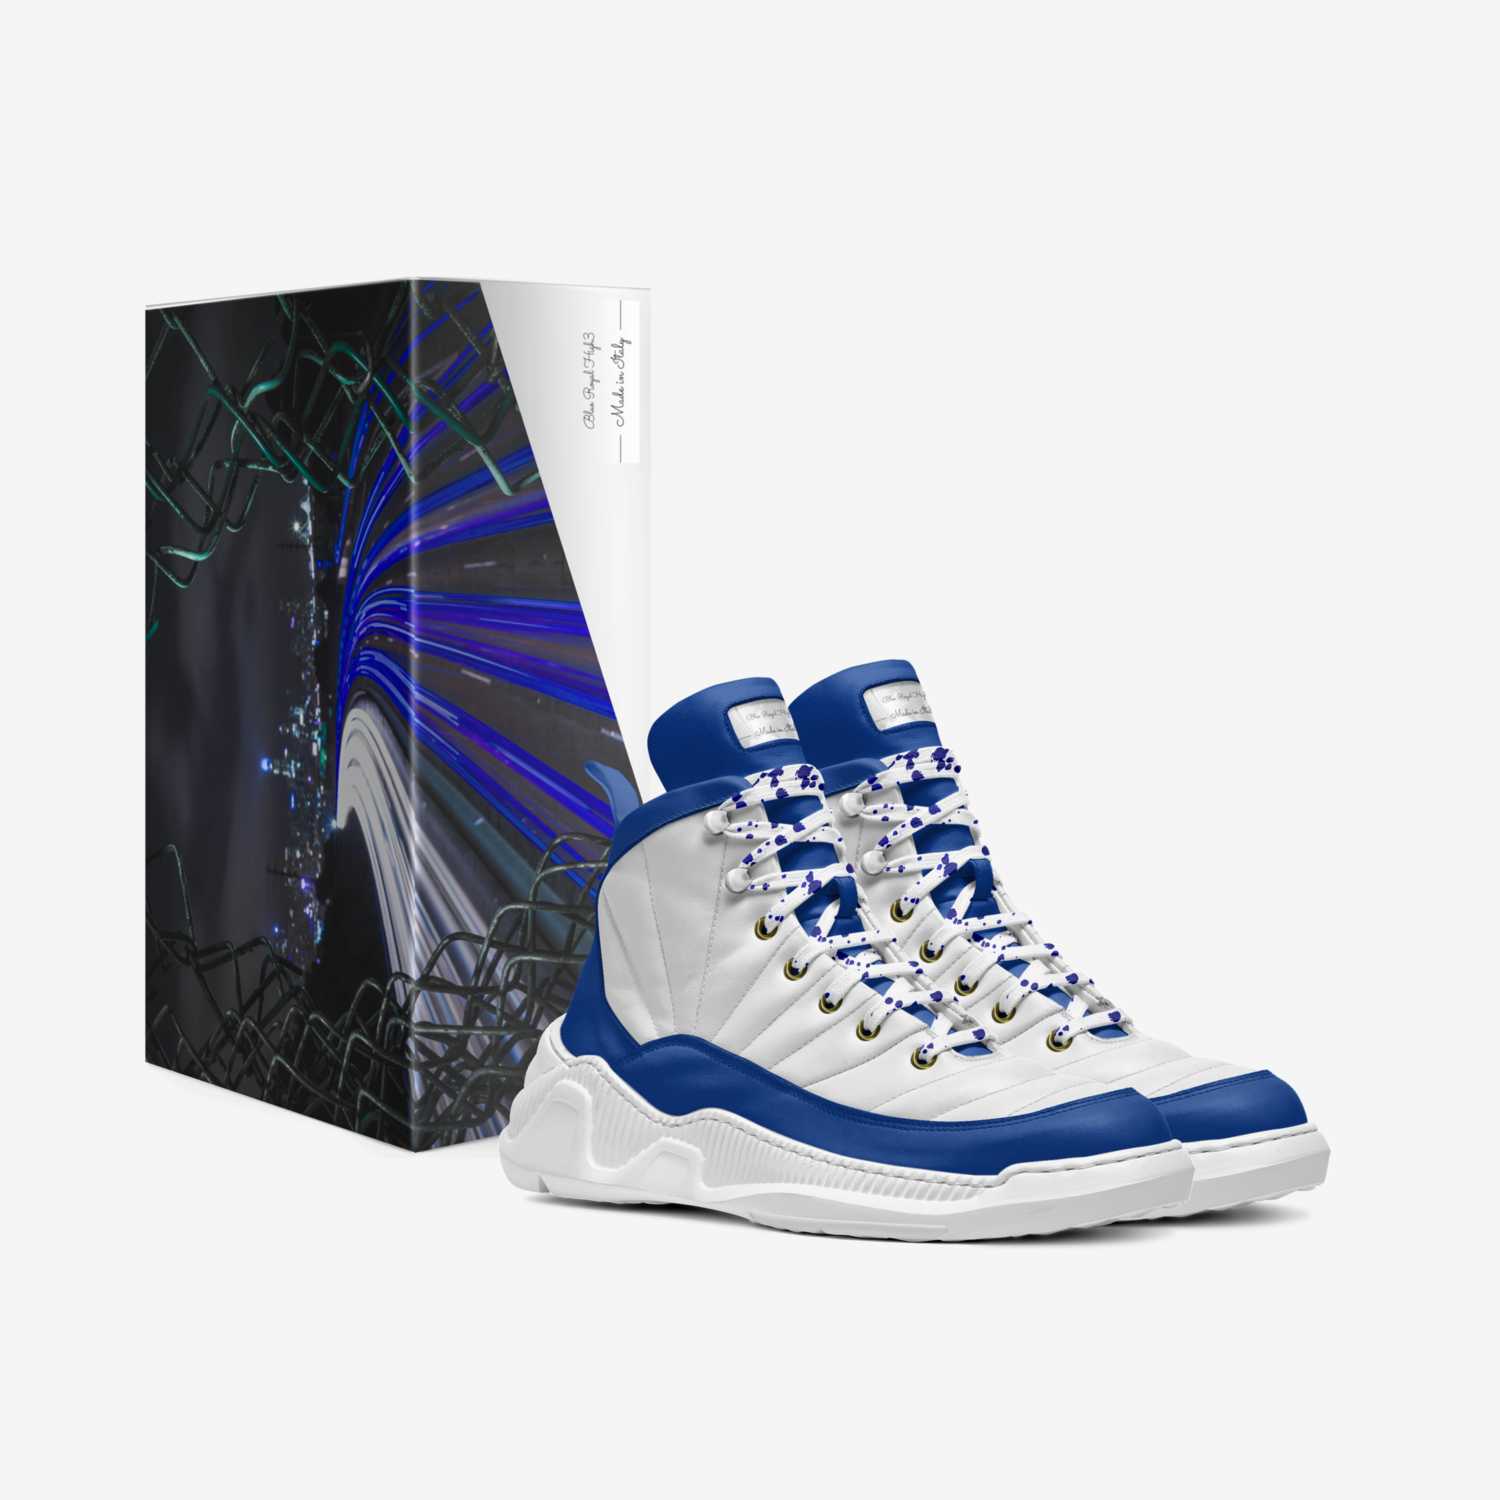 Blue Royal High3 custom made in Italy shoes by Aaron Gregory | Box view